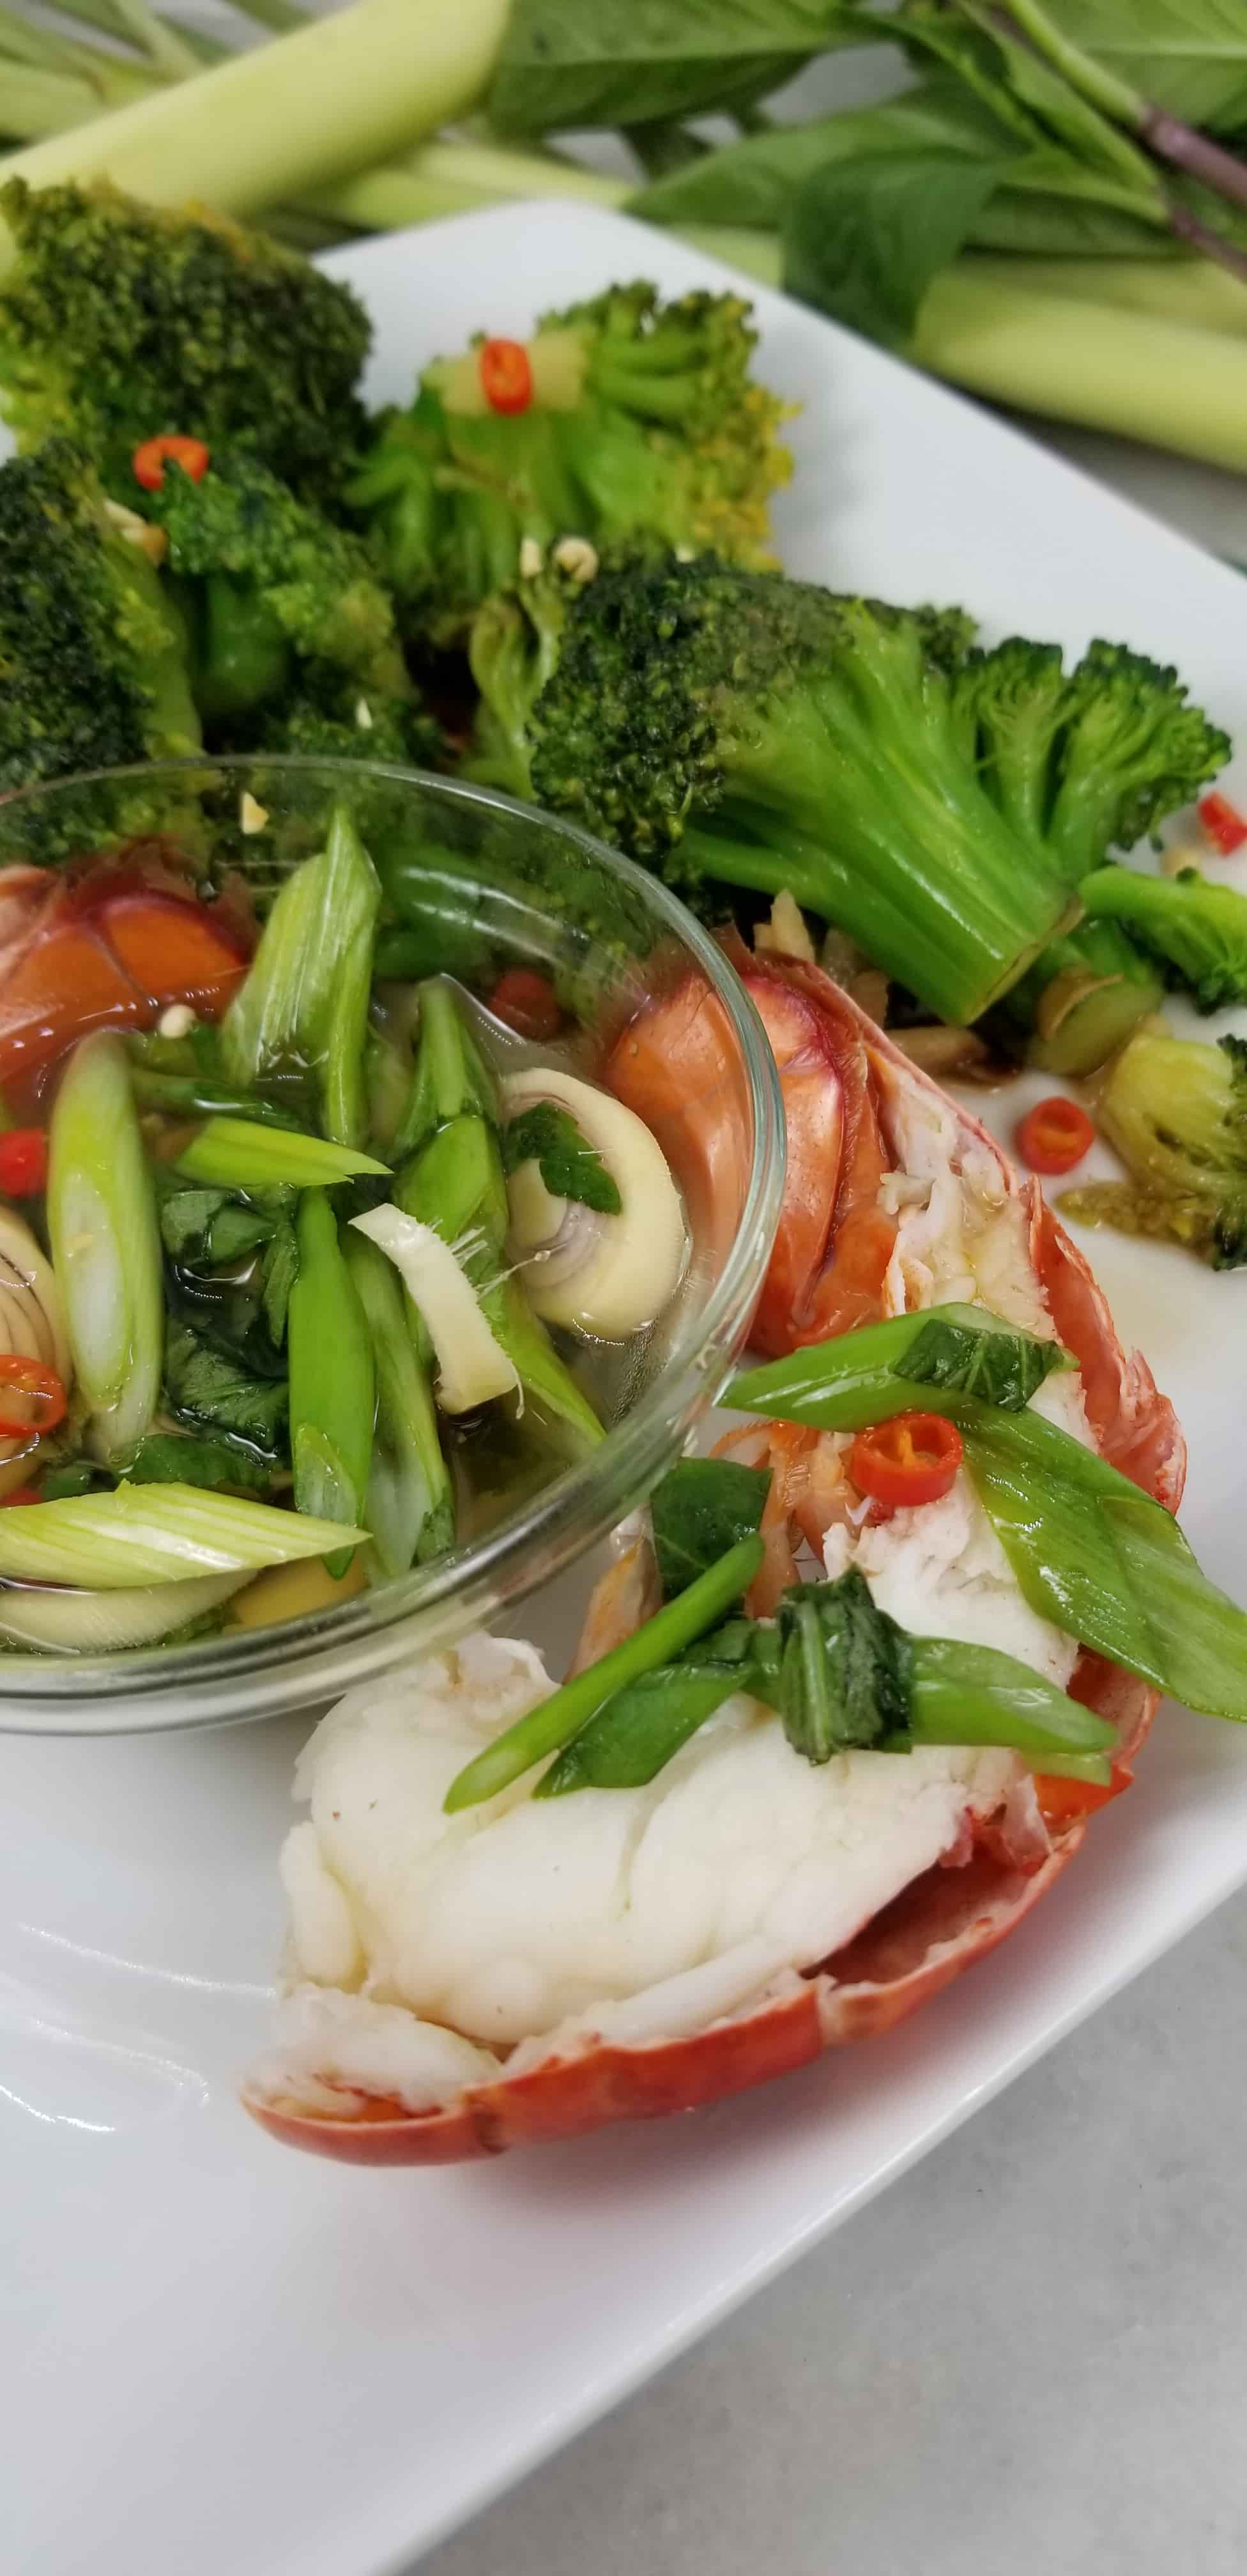 Lobster Tail with Spicy Lemongrass Dressing